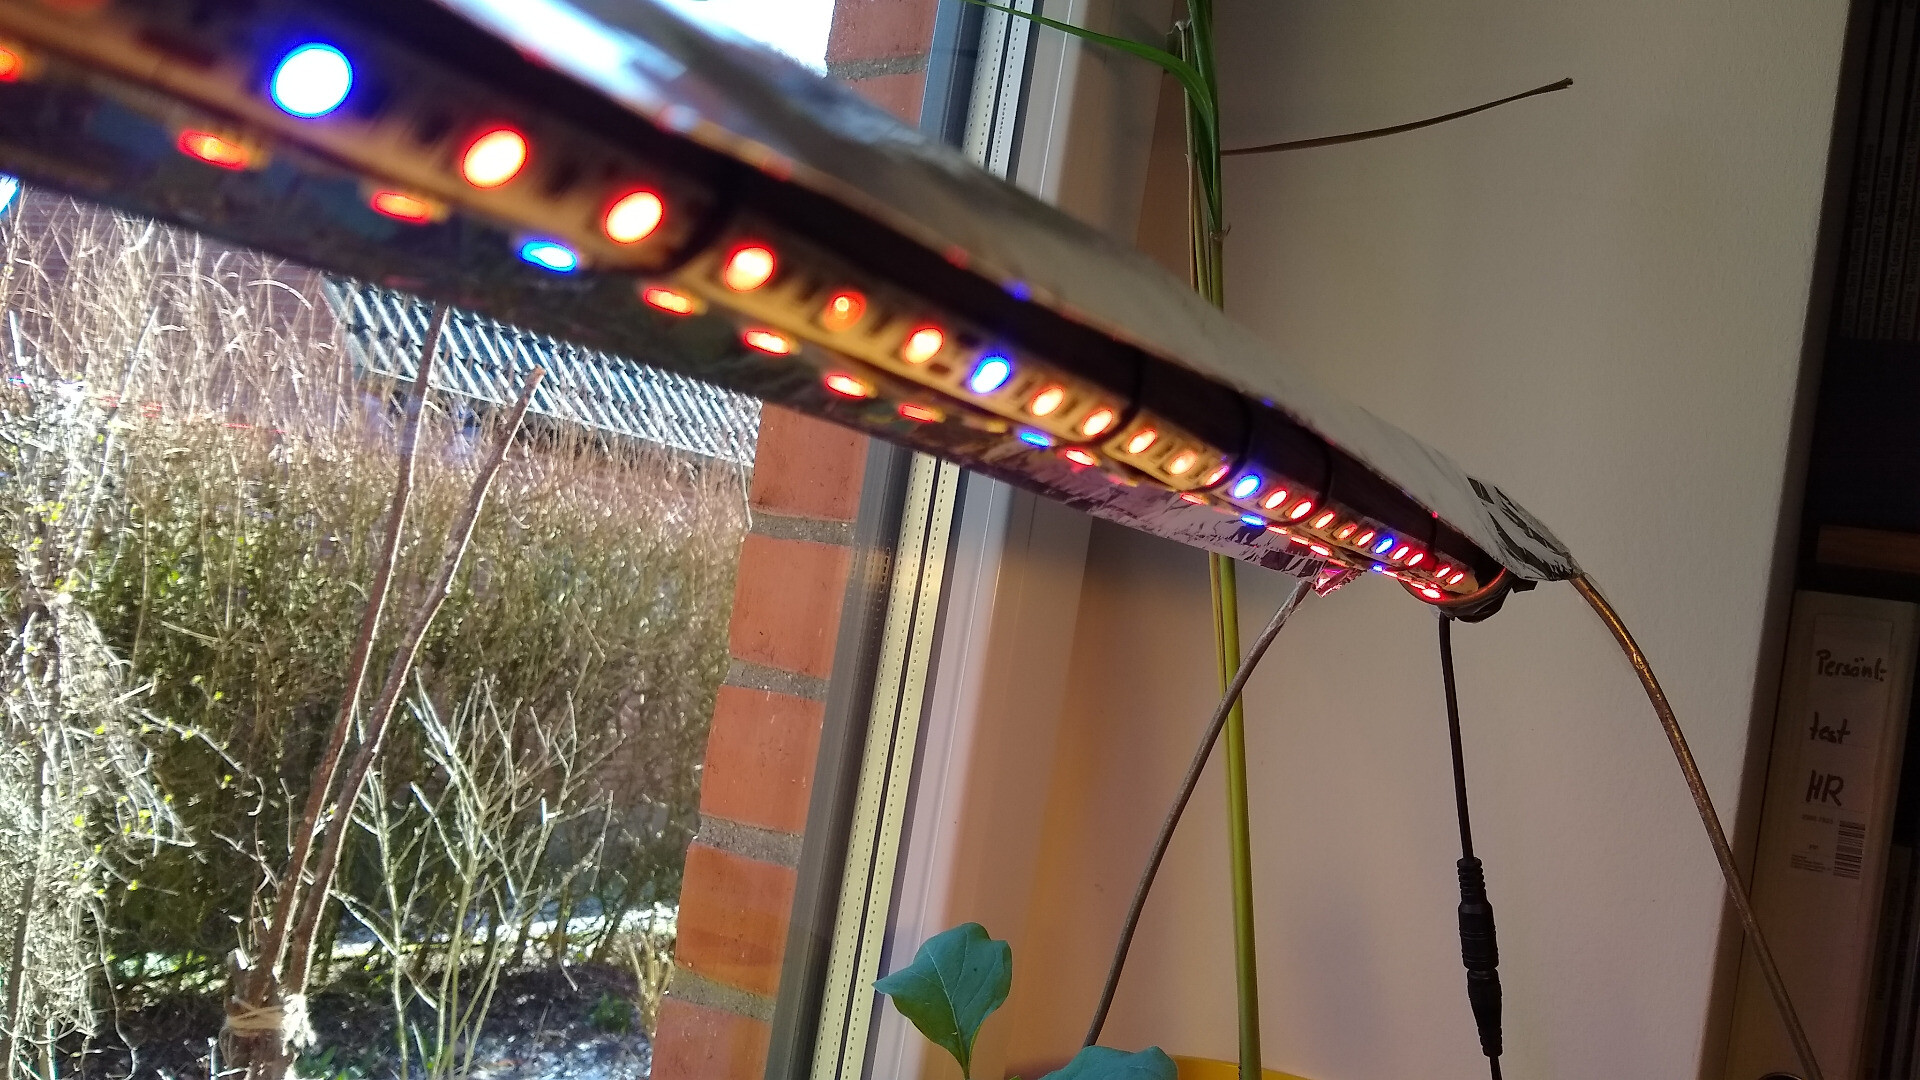  growlight made from LED strips with cover made of folded aluminium foil